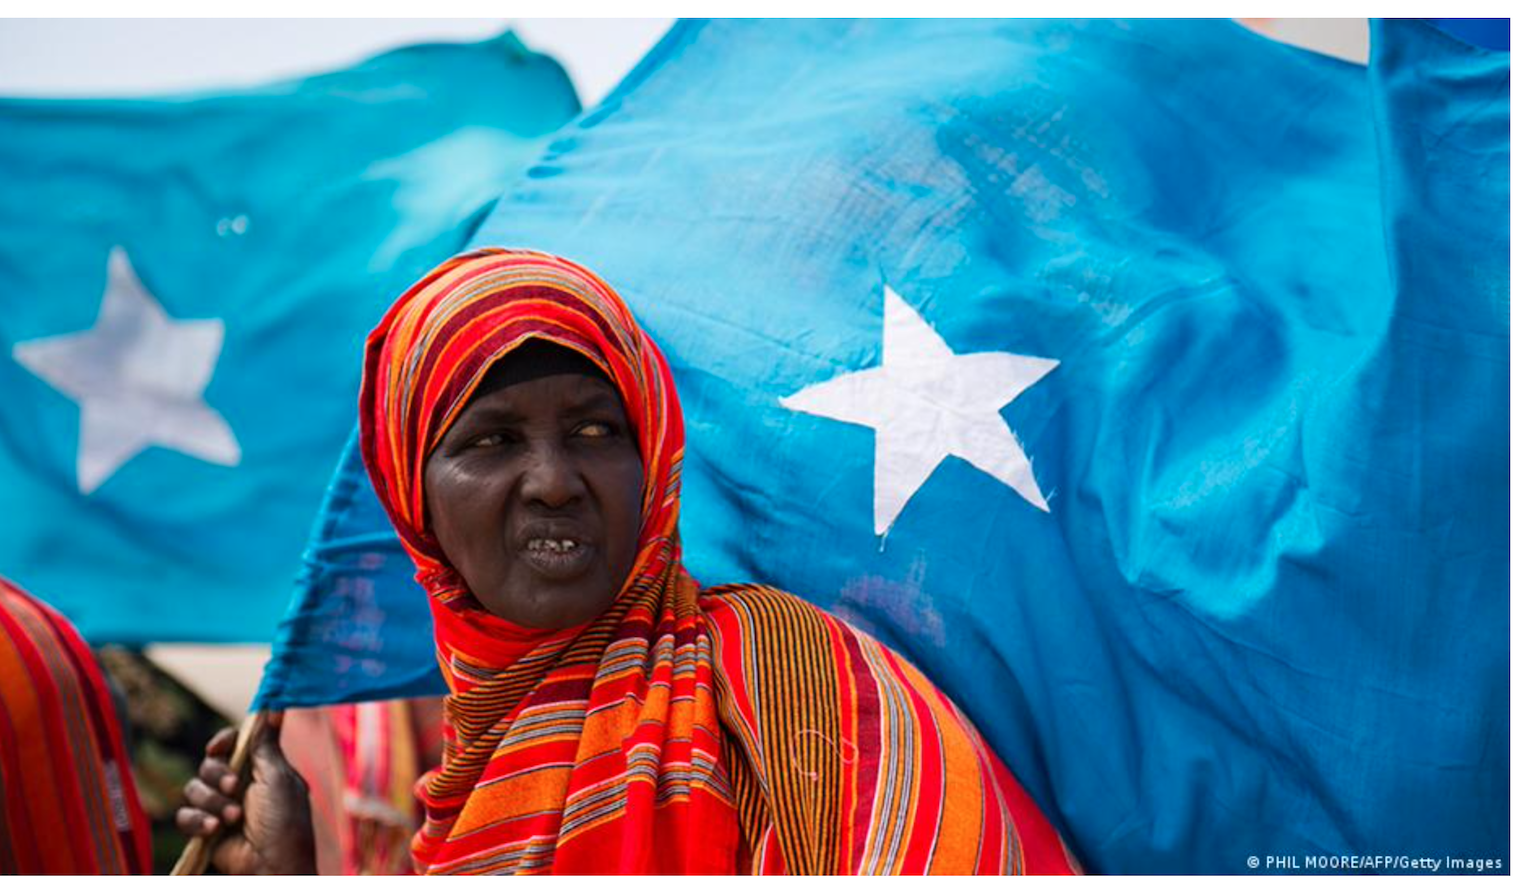 Beyond the pandemic: strengthening Somalia’s health system